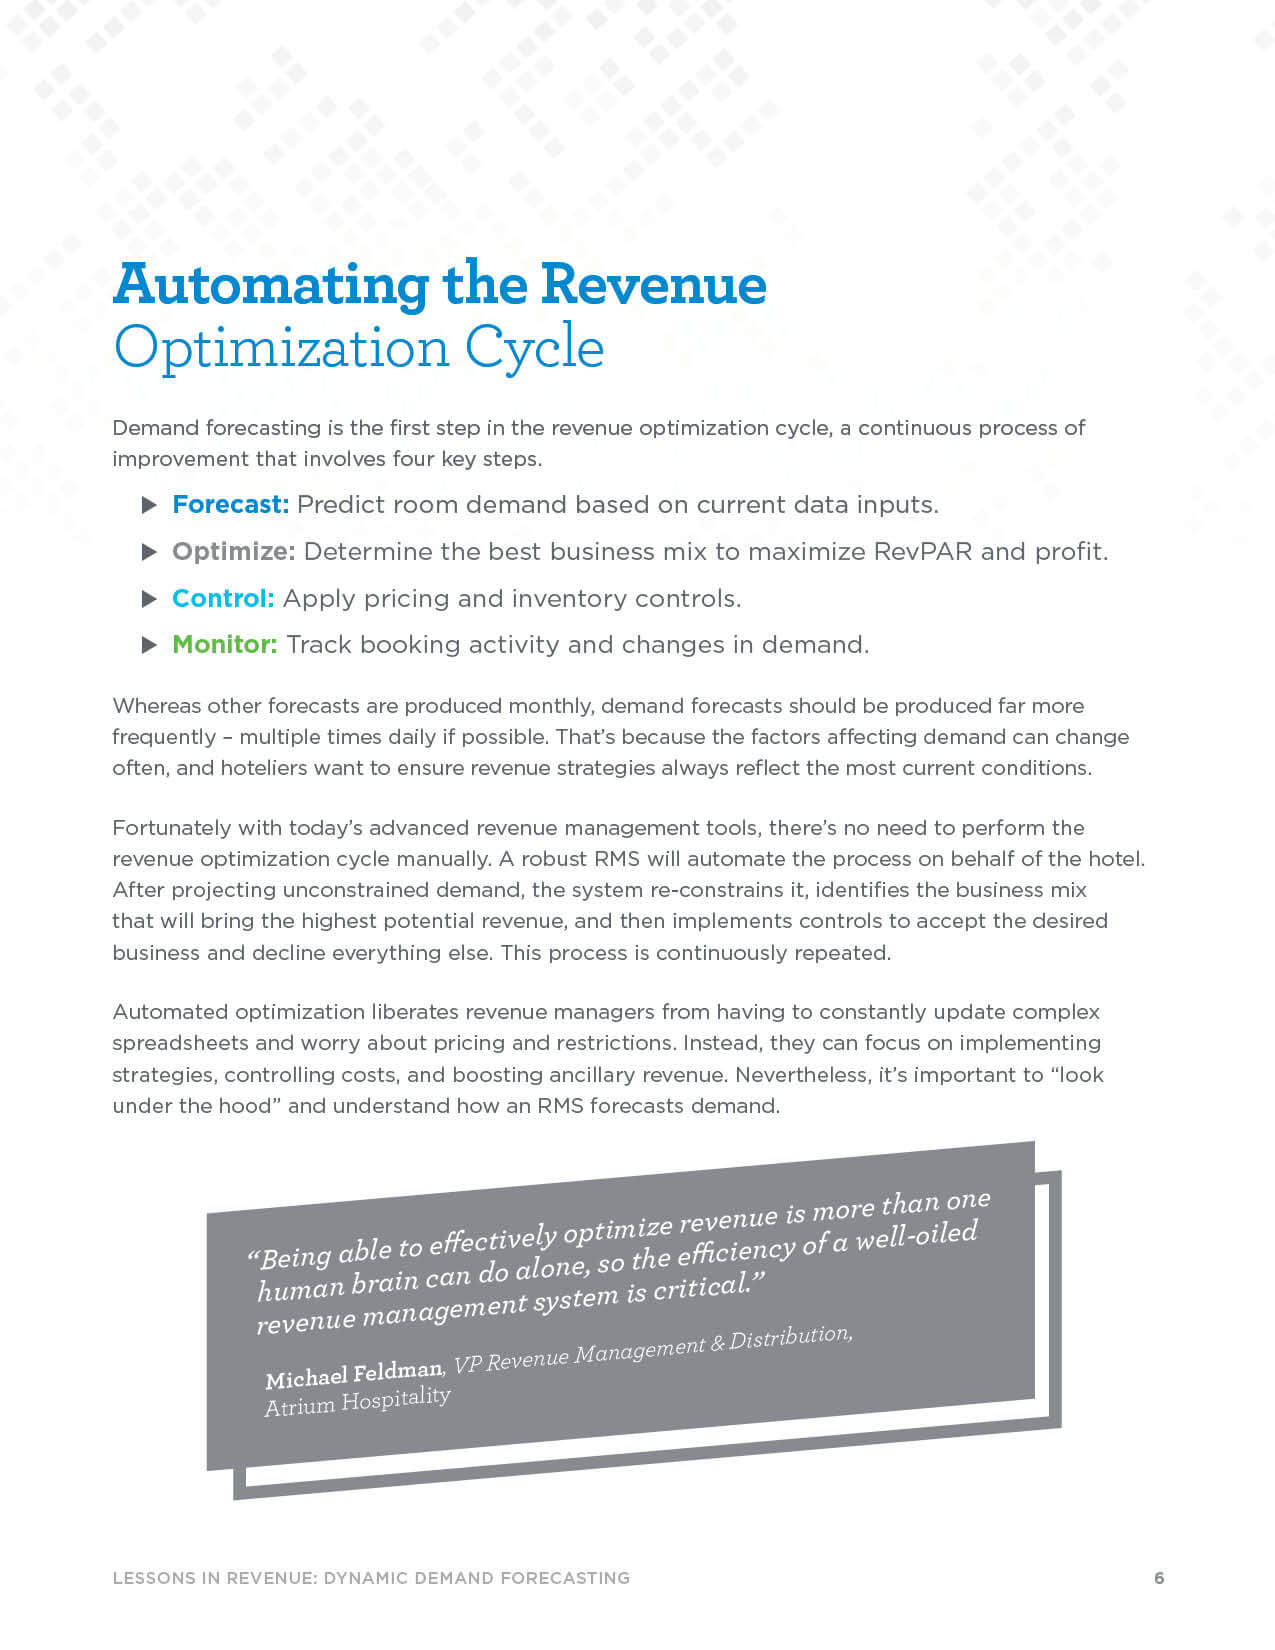 Page 6 - Automating the Revenue Optimization Cycle